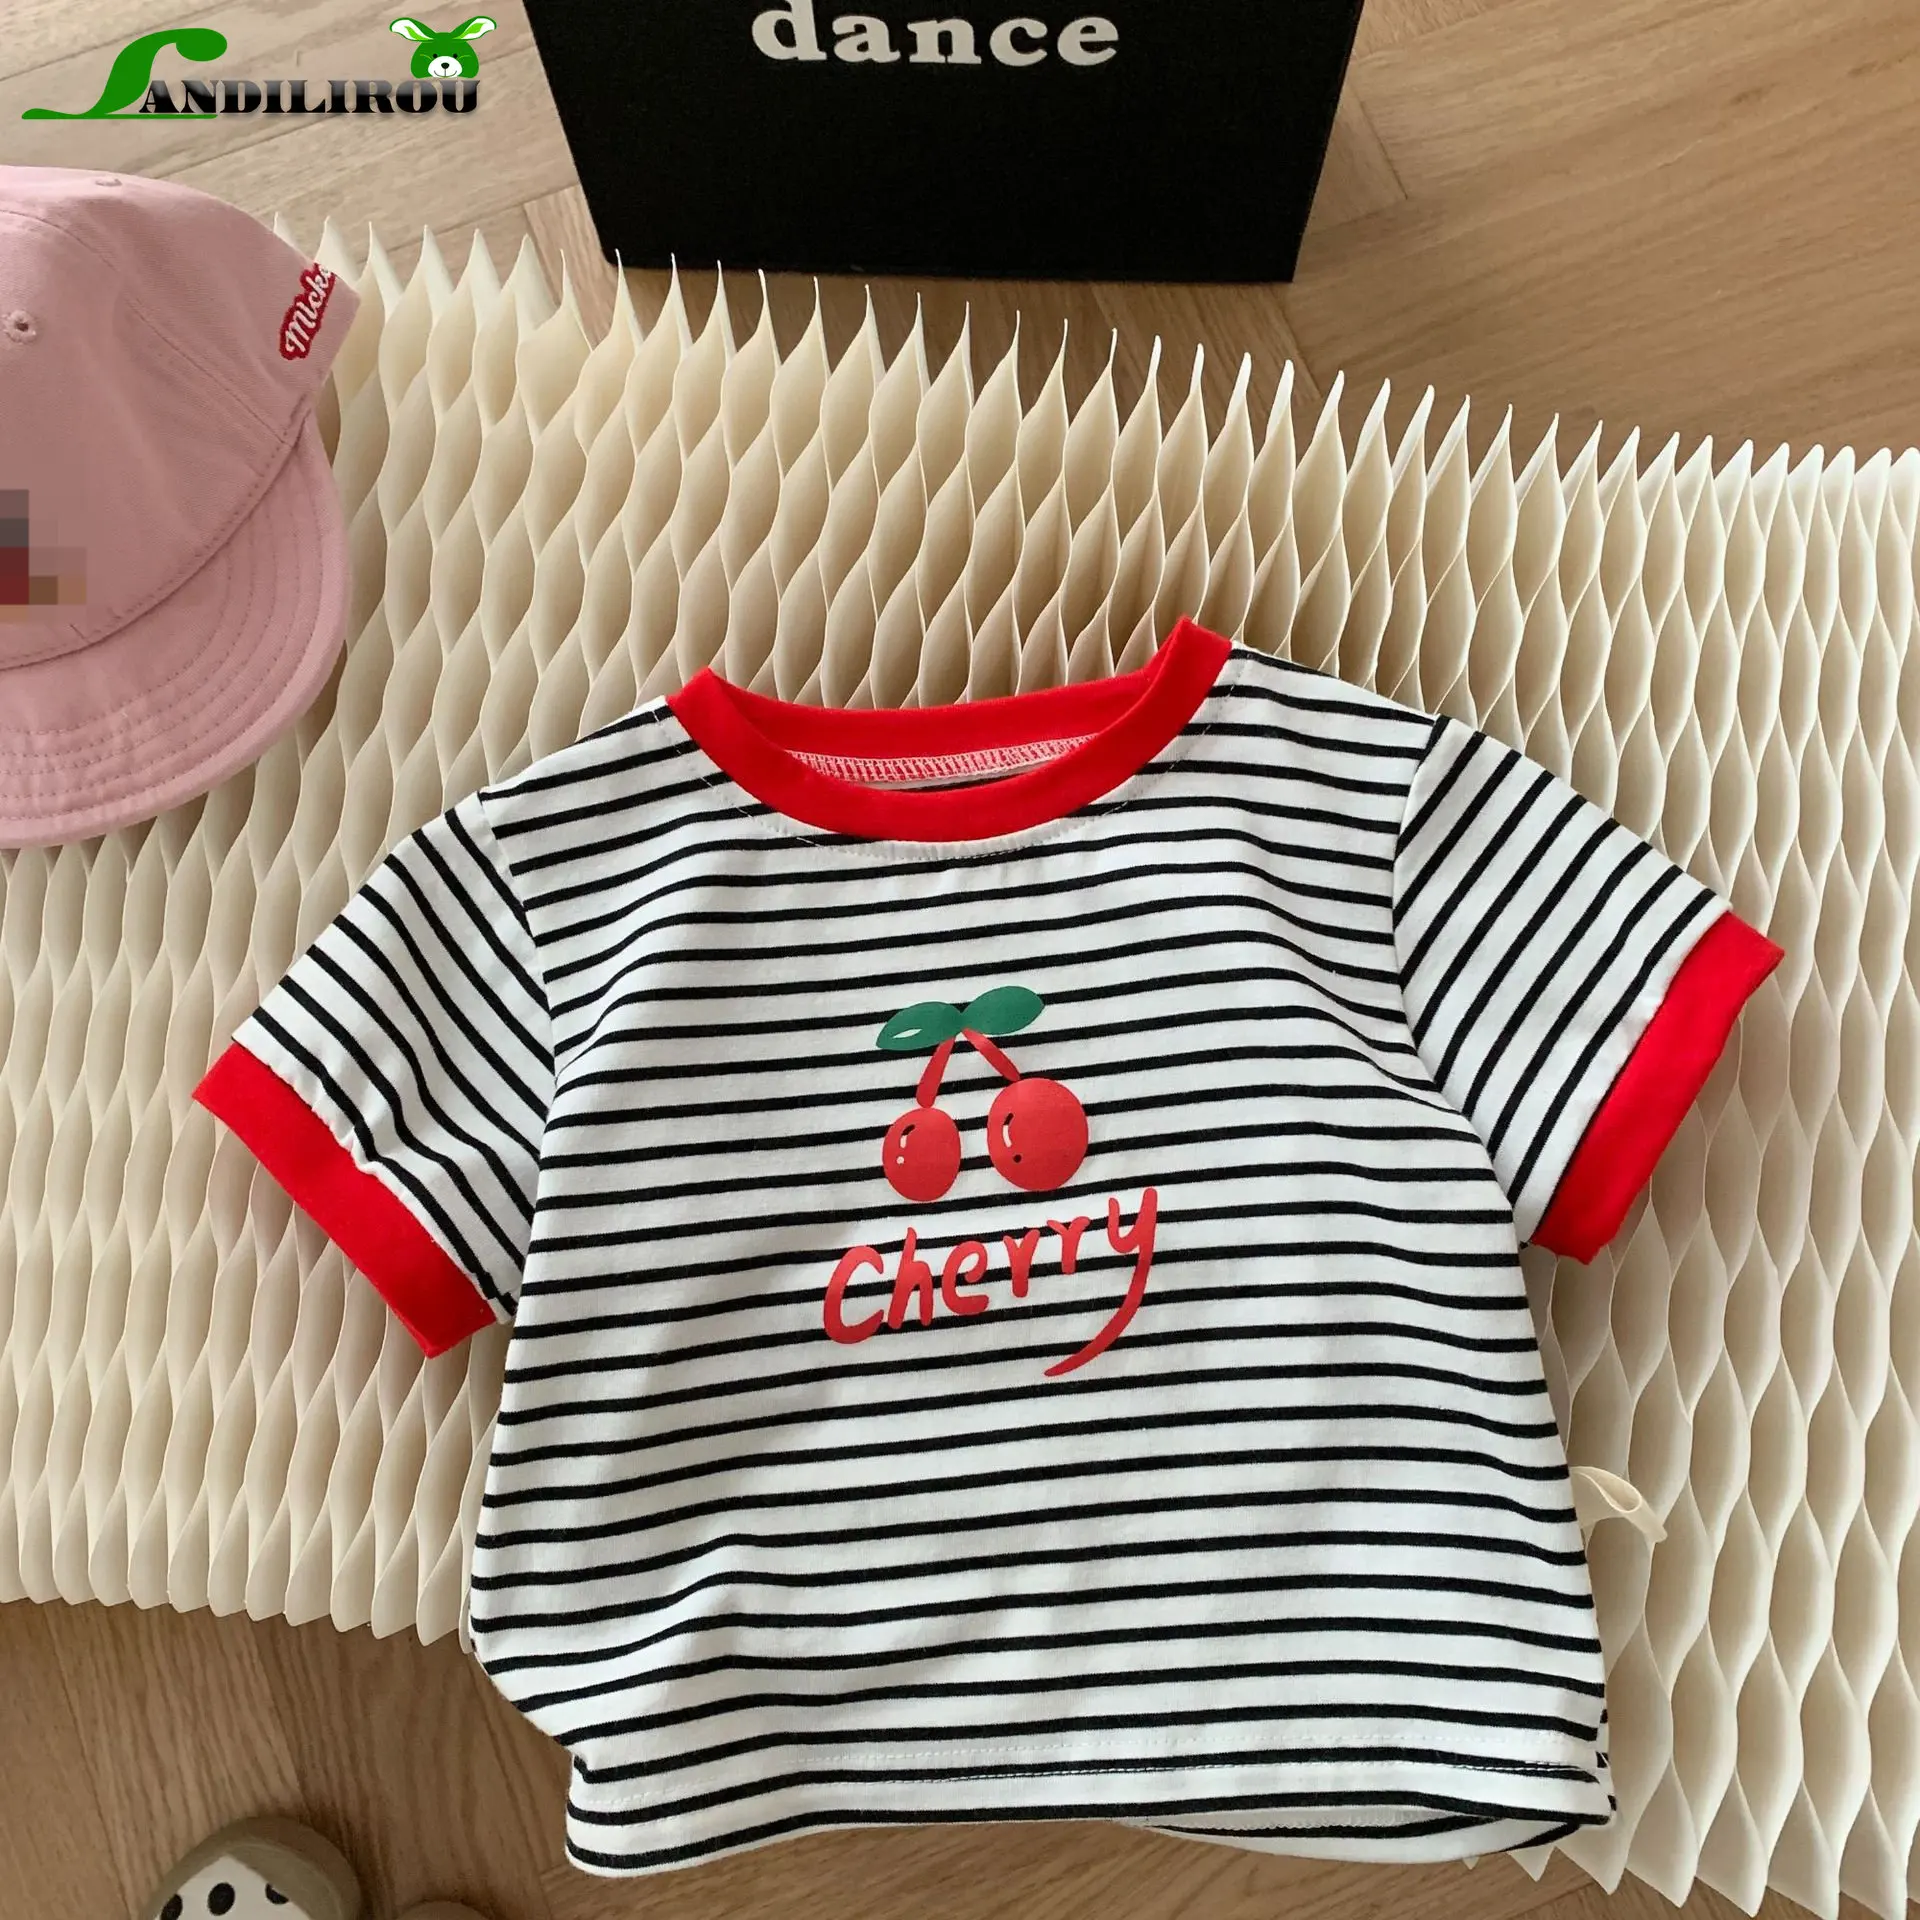 

Cherry-themed Kids T-Shirt: Striped Top Color Blocking Infants Children Up To 6 Years Perfect for Summer Baby Fashion Clothes